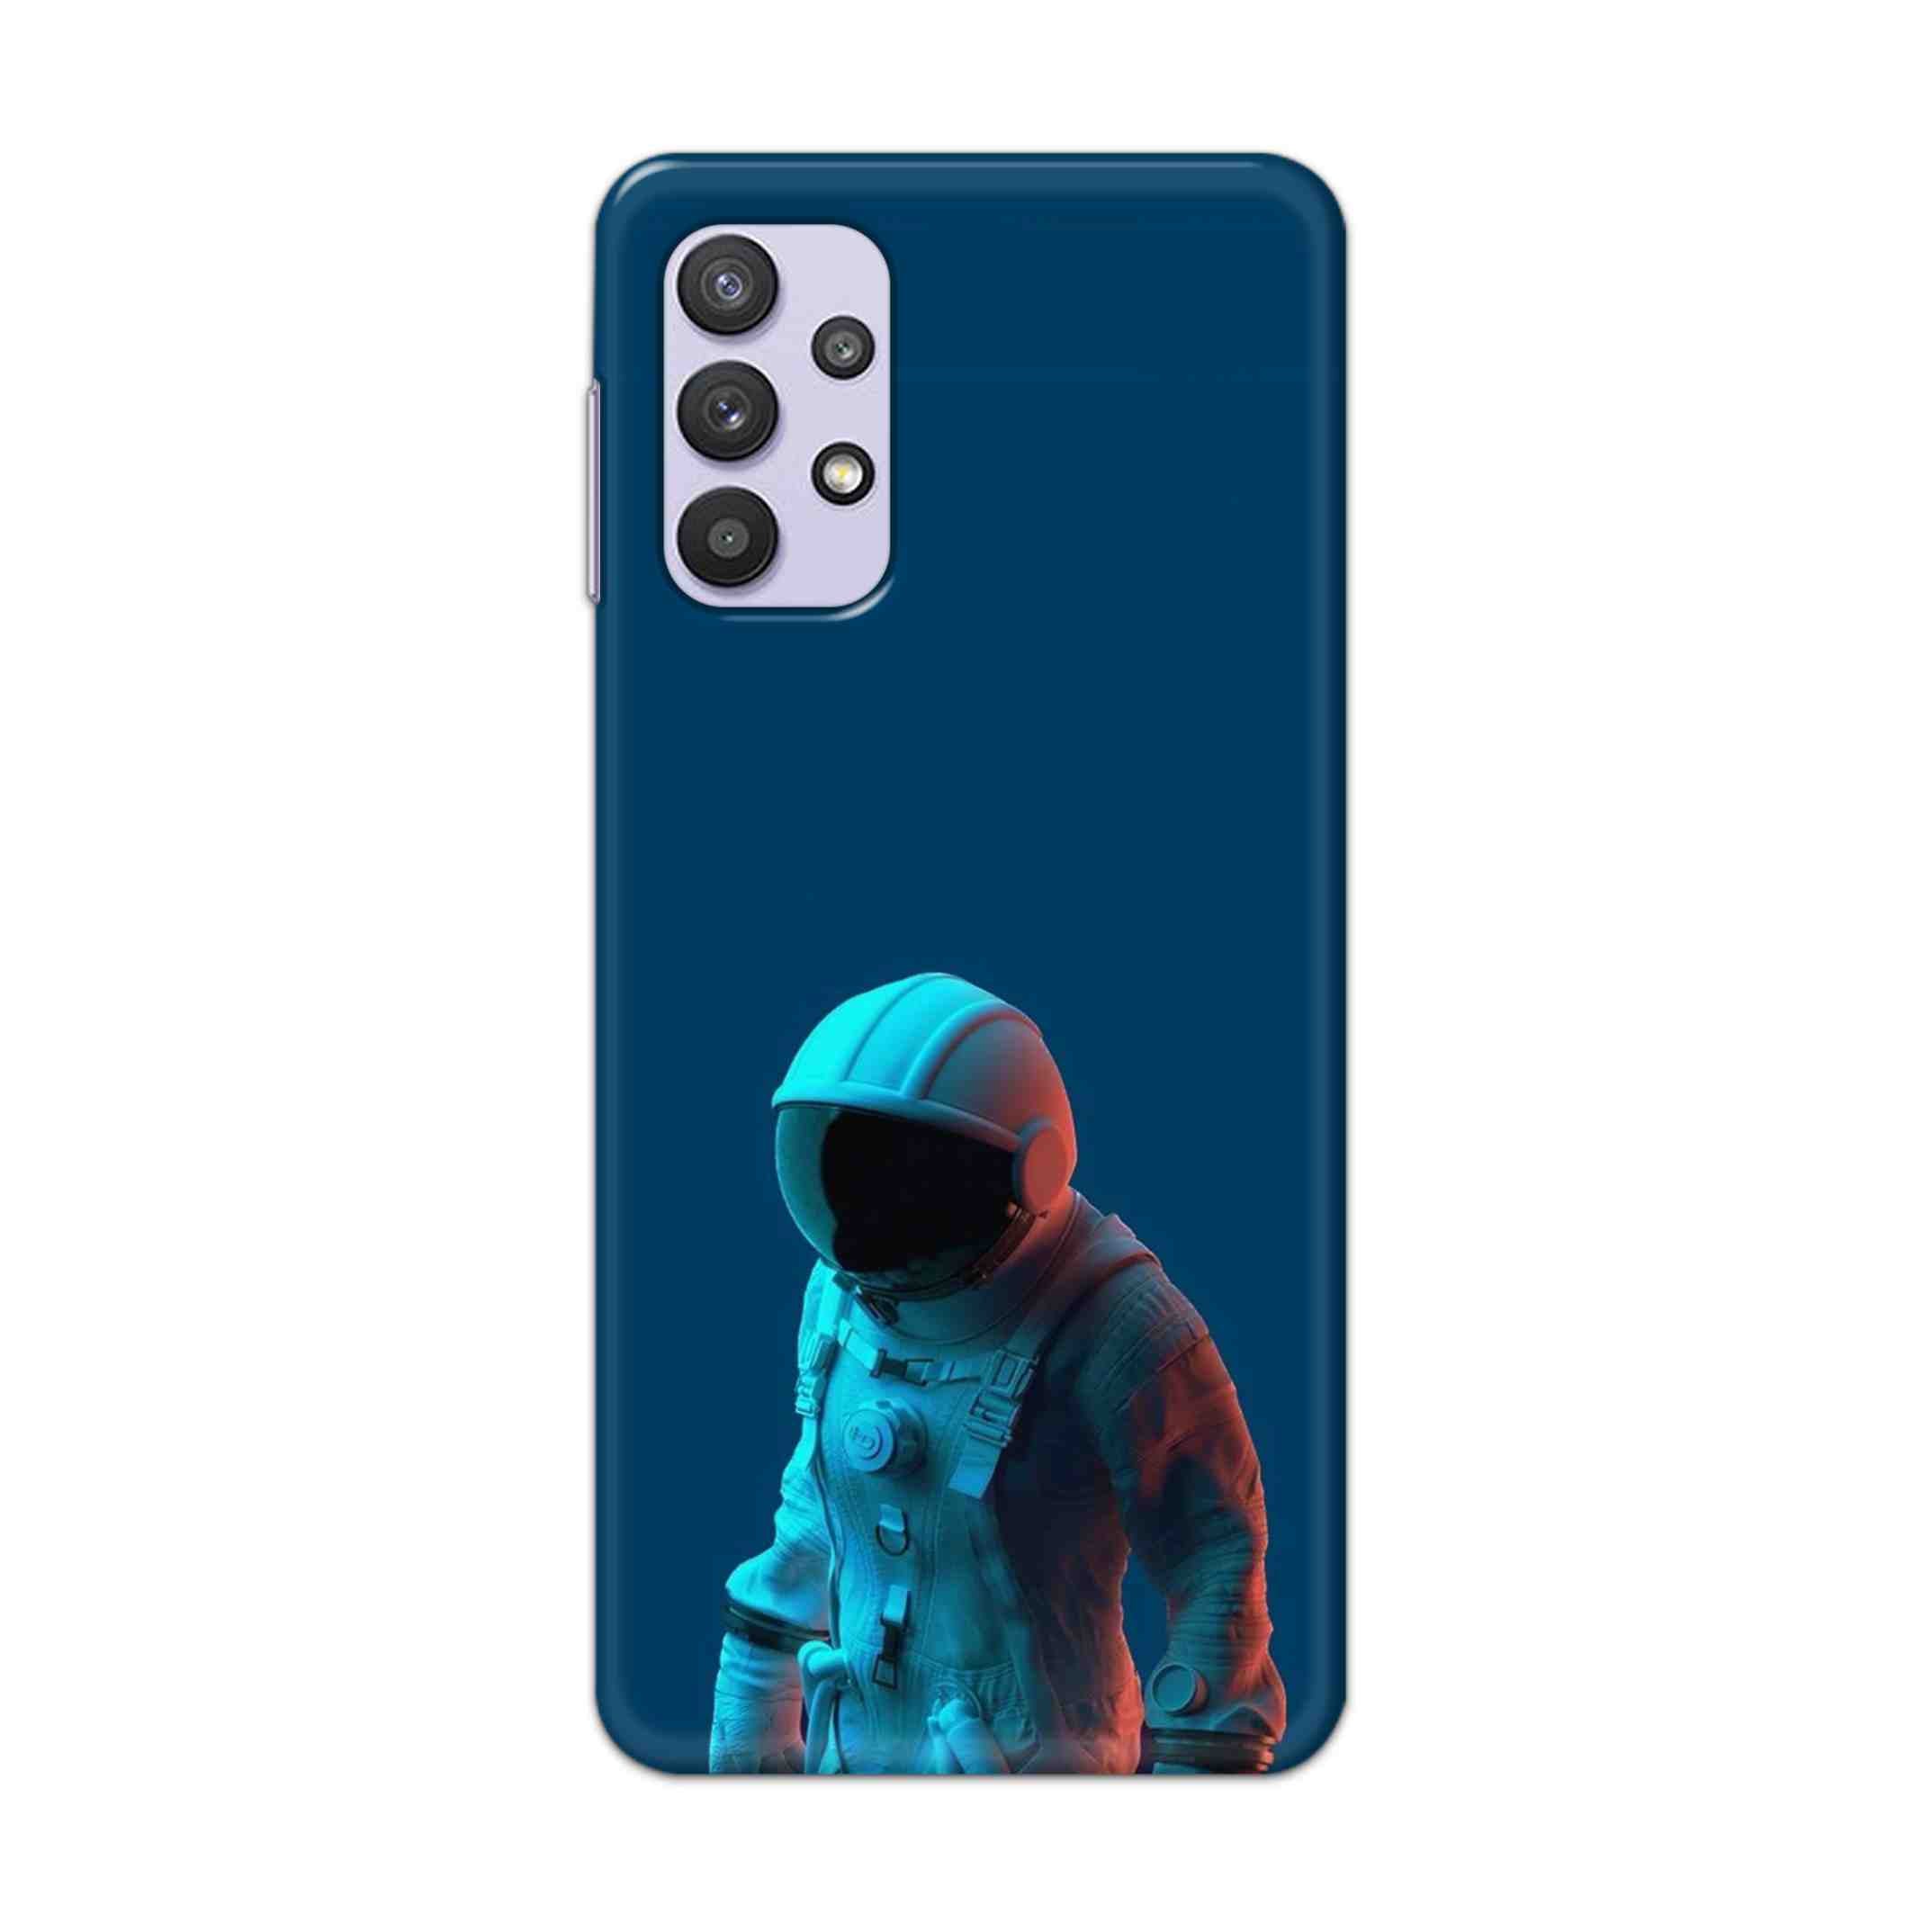 Buy Blue Astronaut Hard Back Mobile Phone Case Cover For Samsung A32 5G Online